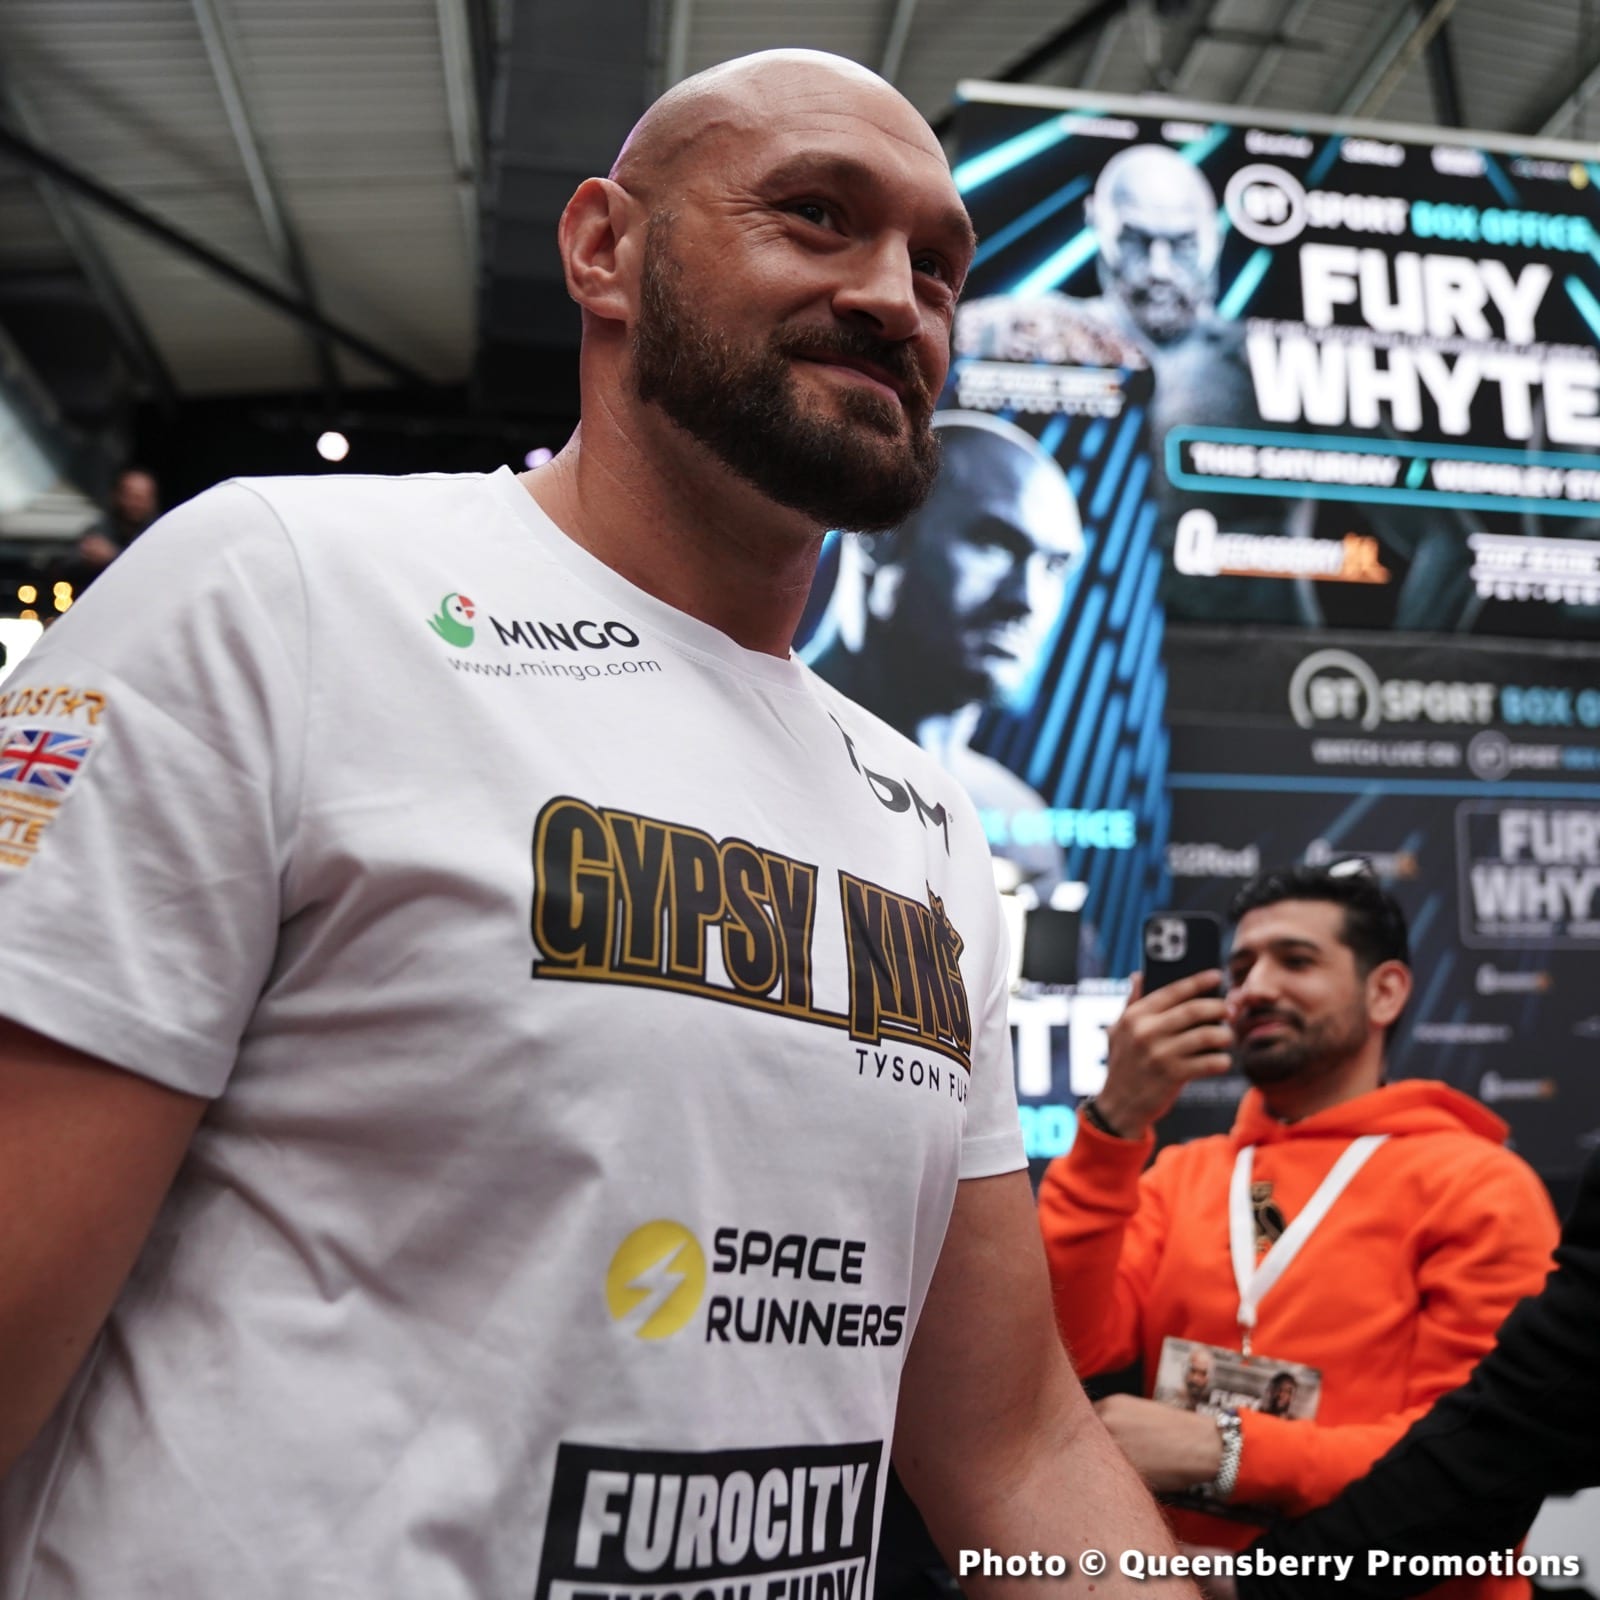 Tyson Fury Loses It When Told Upcoming Chisora Fight Is A “Mismatch”